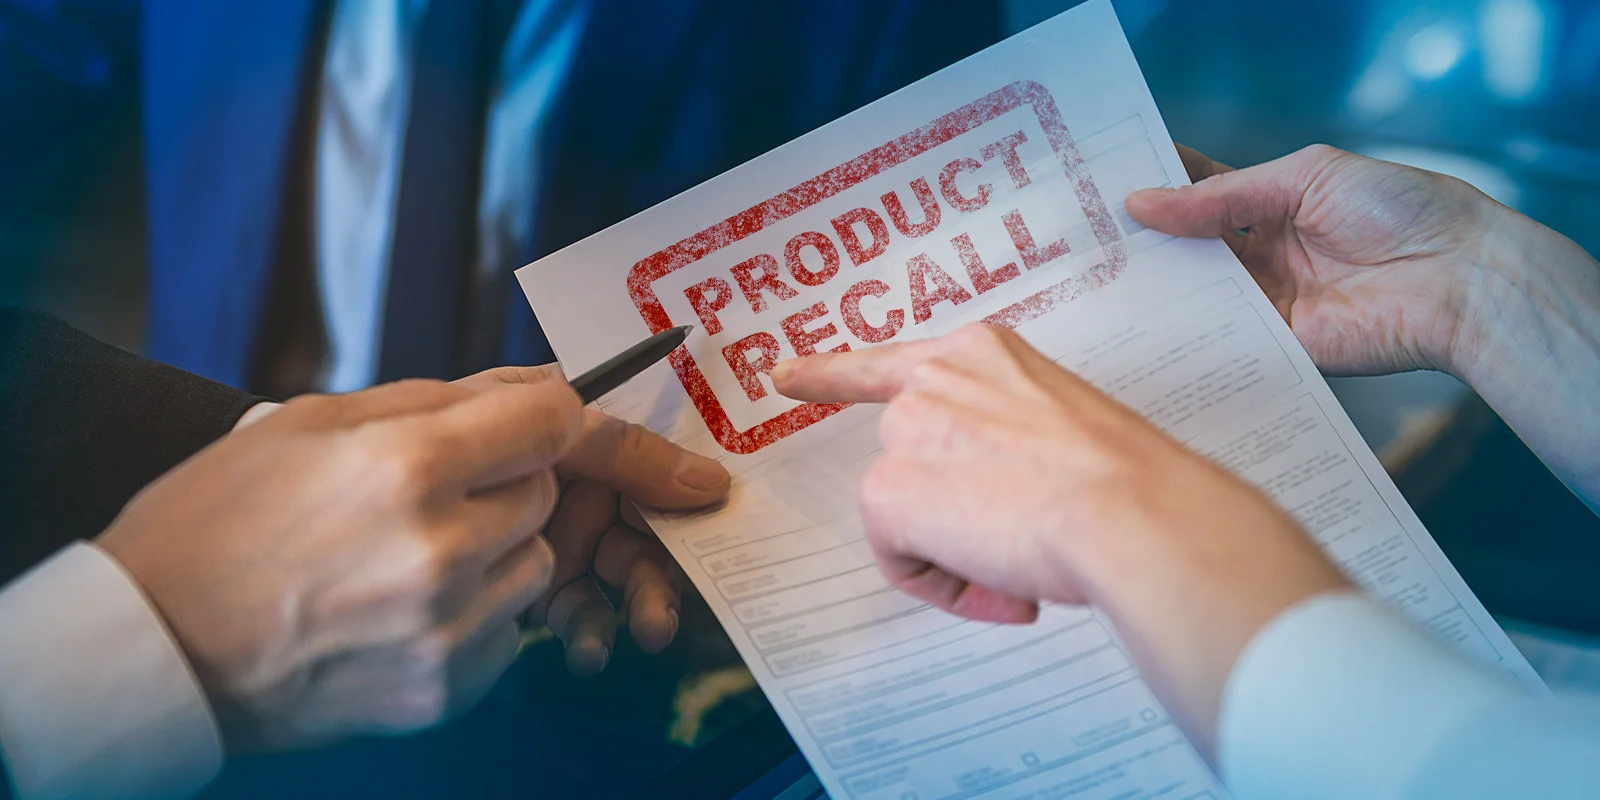 Product Recall Lawyer